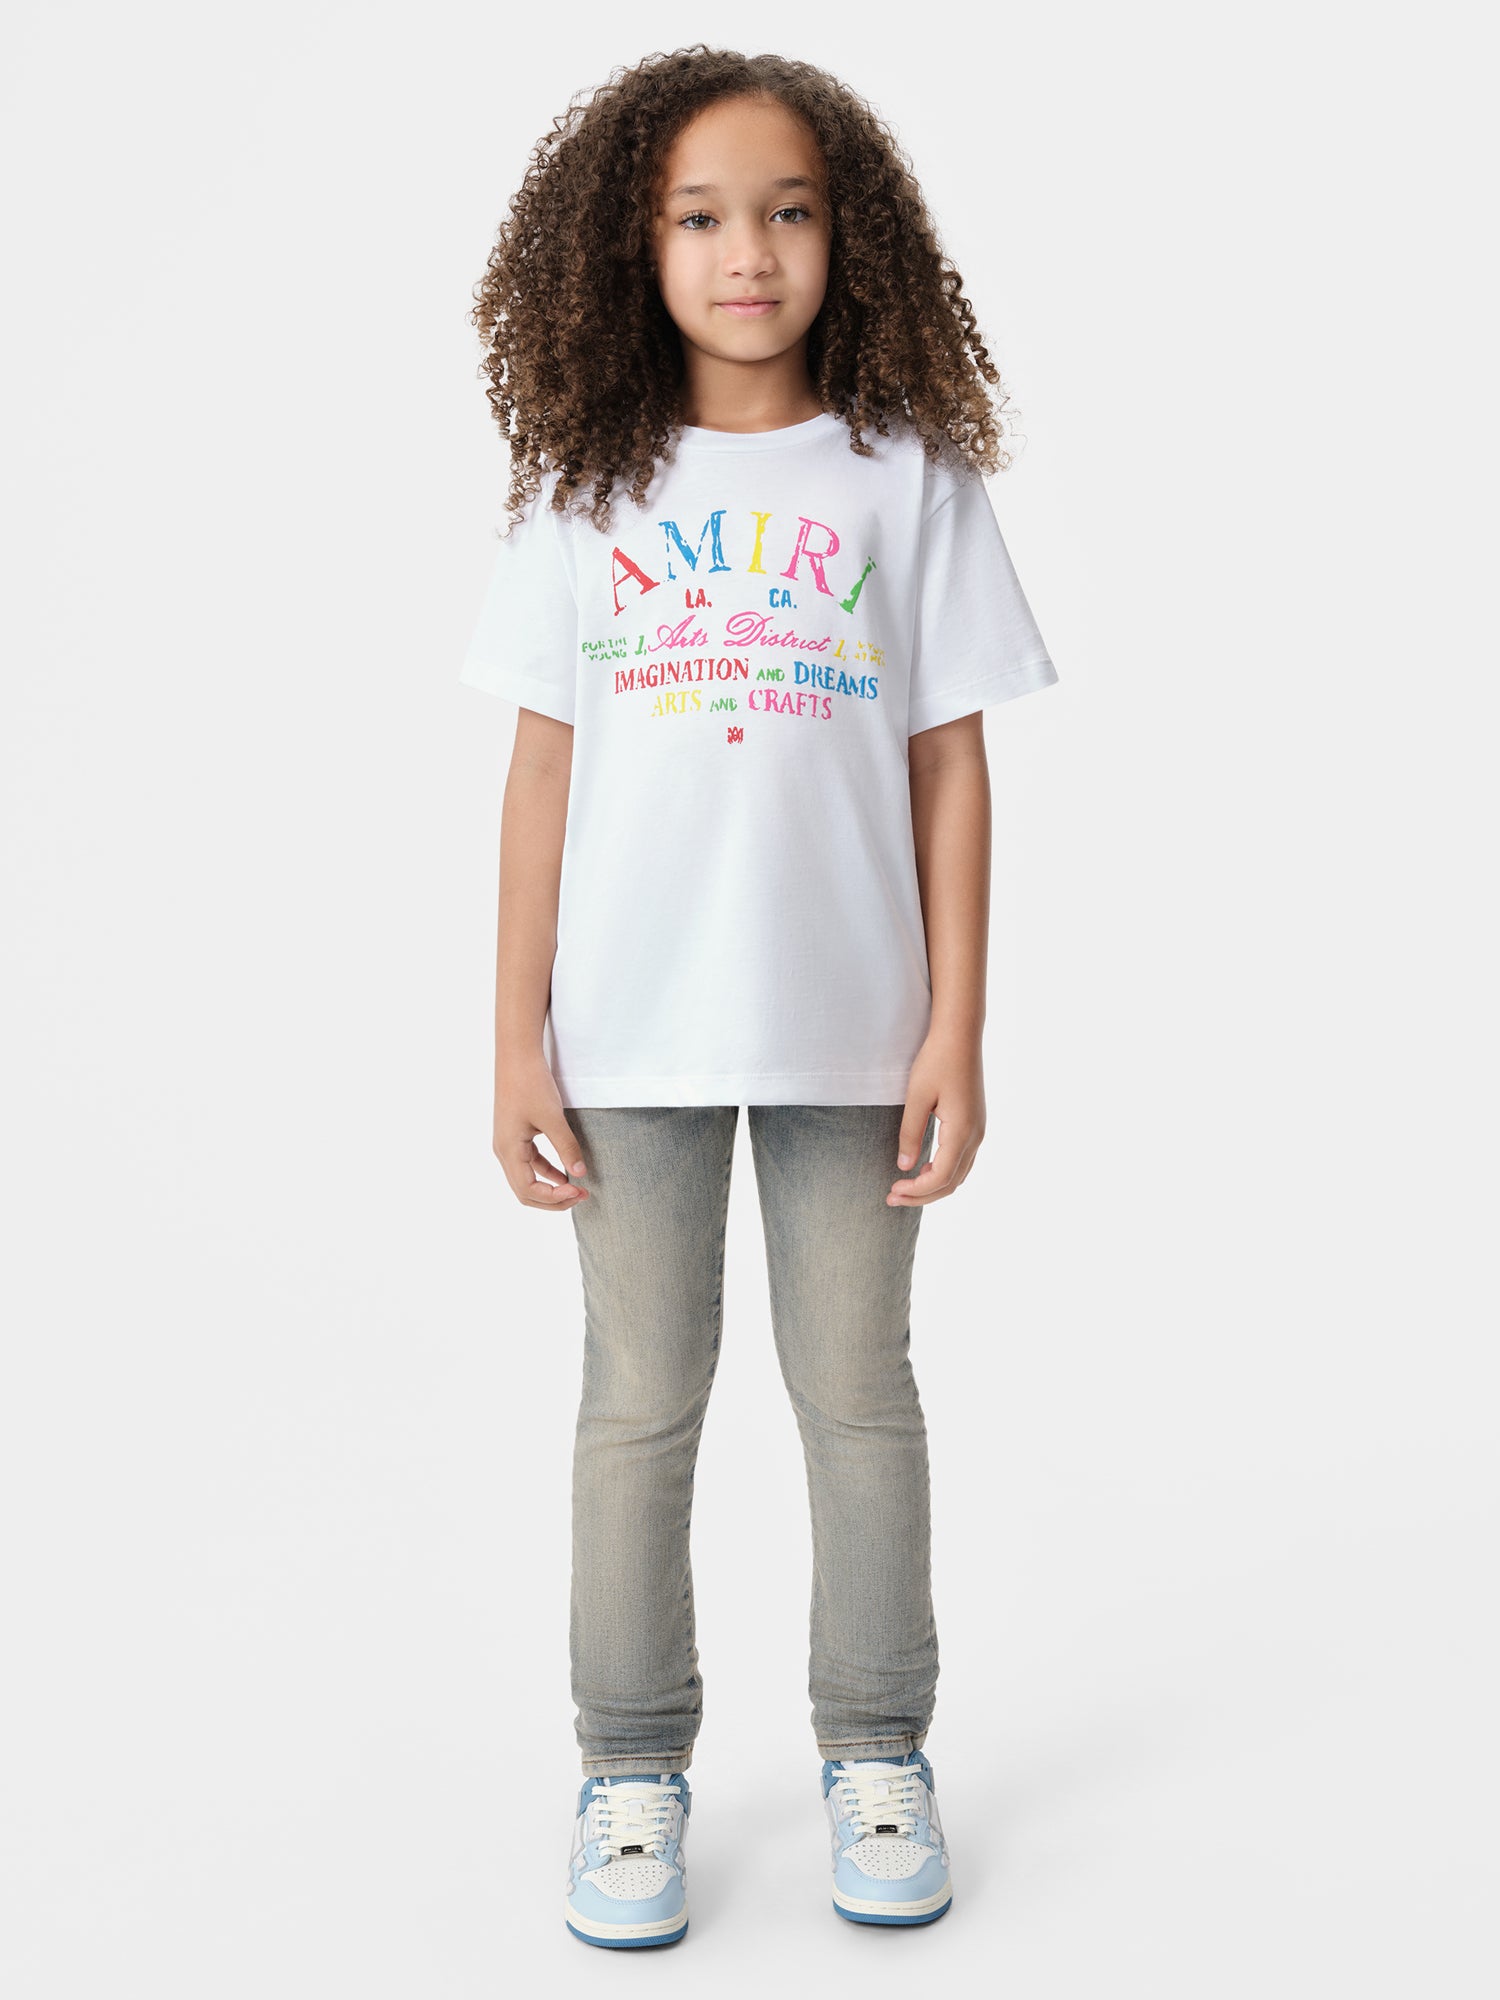 Product KIDS - KIDS' ARTS DISTRICT SCRIBBLE TEE - White featured image